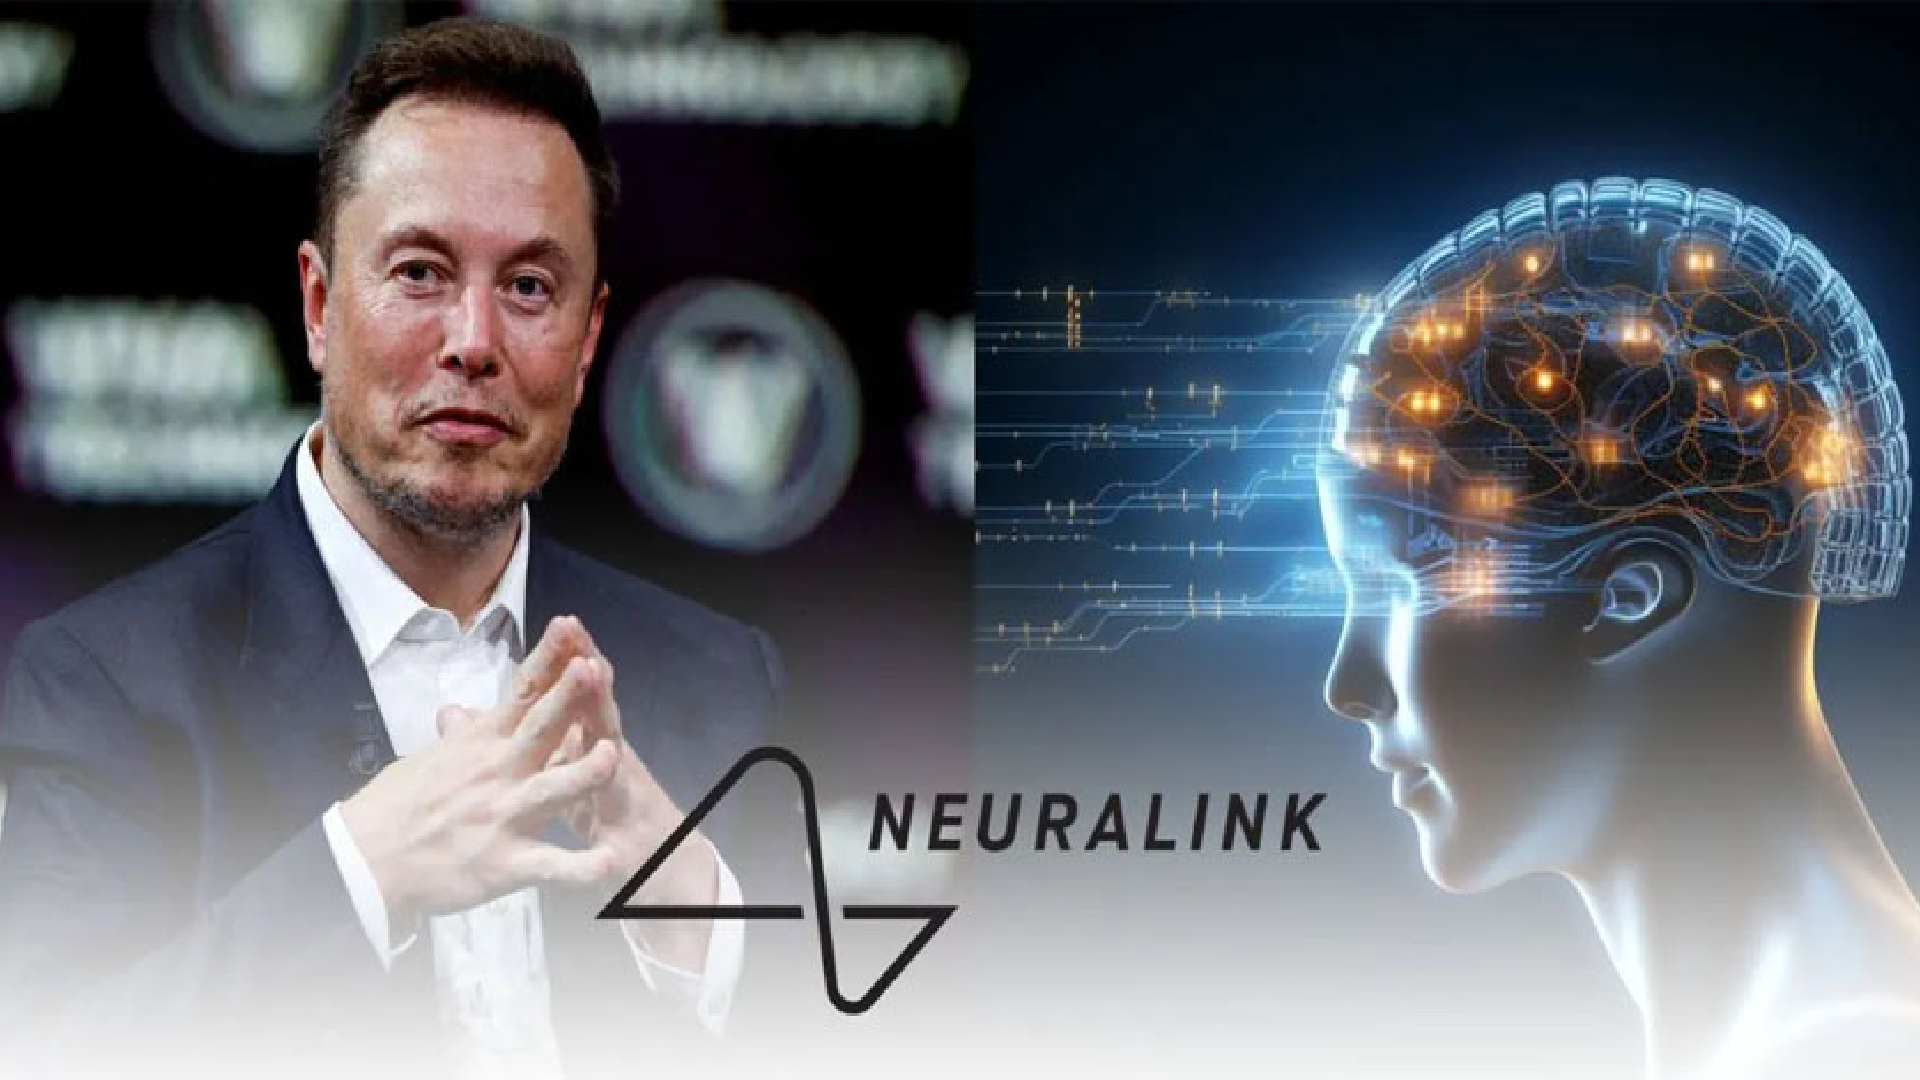 Elon Musk reports that Neuralink has successfully implanted a brain chip into a human.